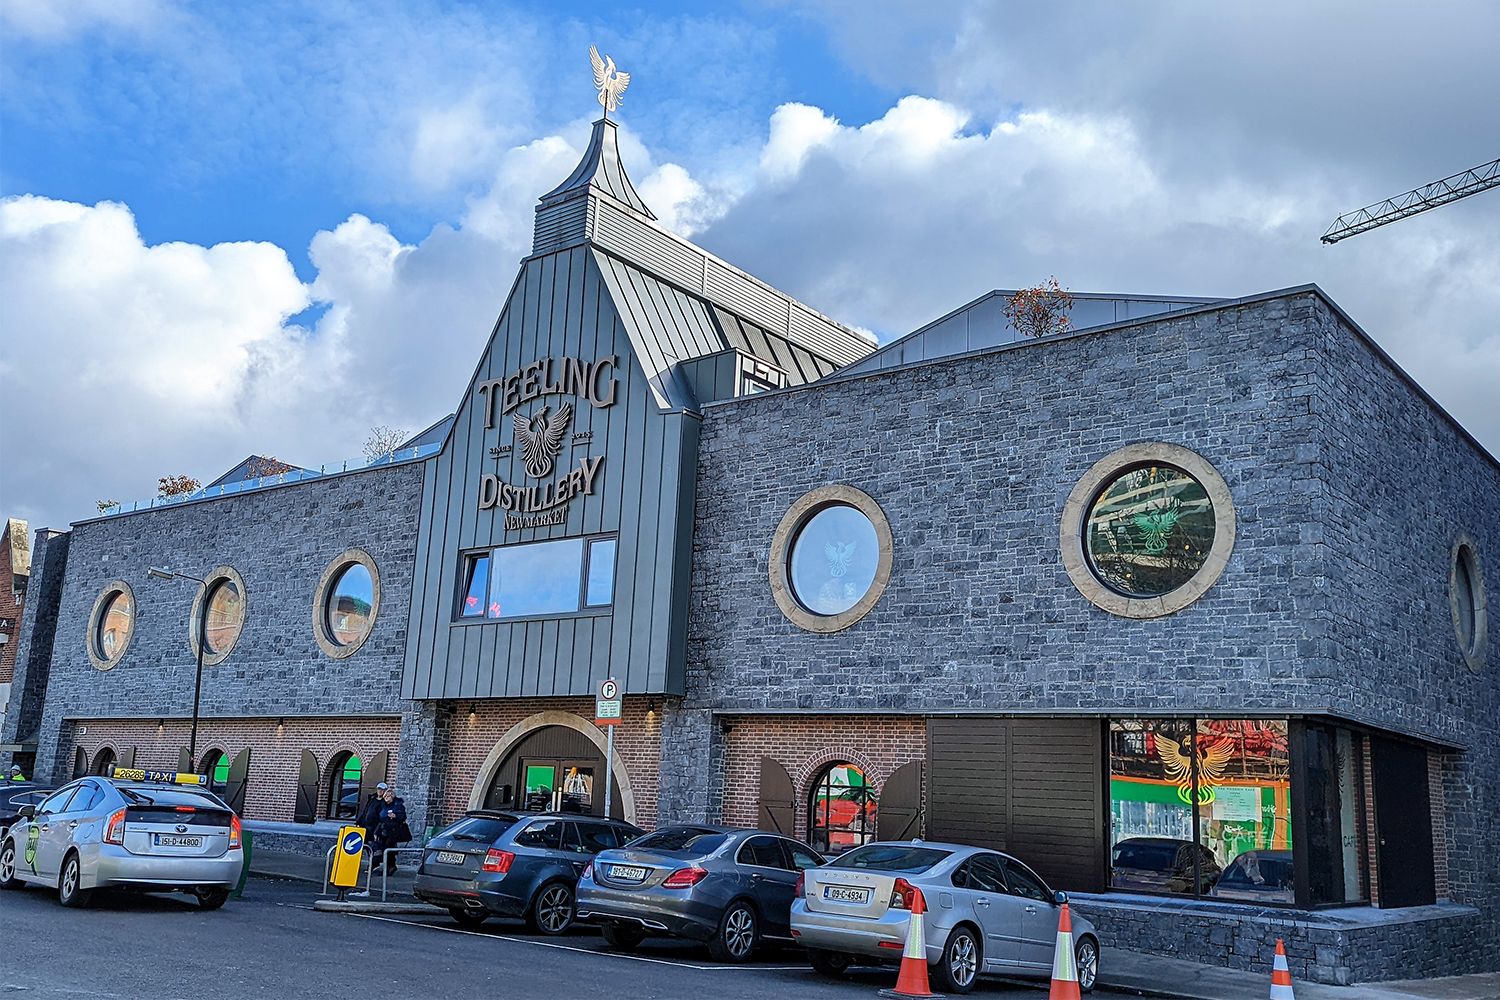 The new Teeling distillery in Newmarket Square in Dublin, Ireland